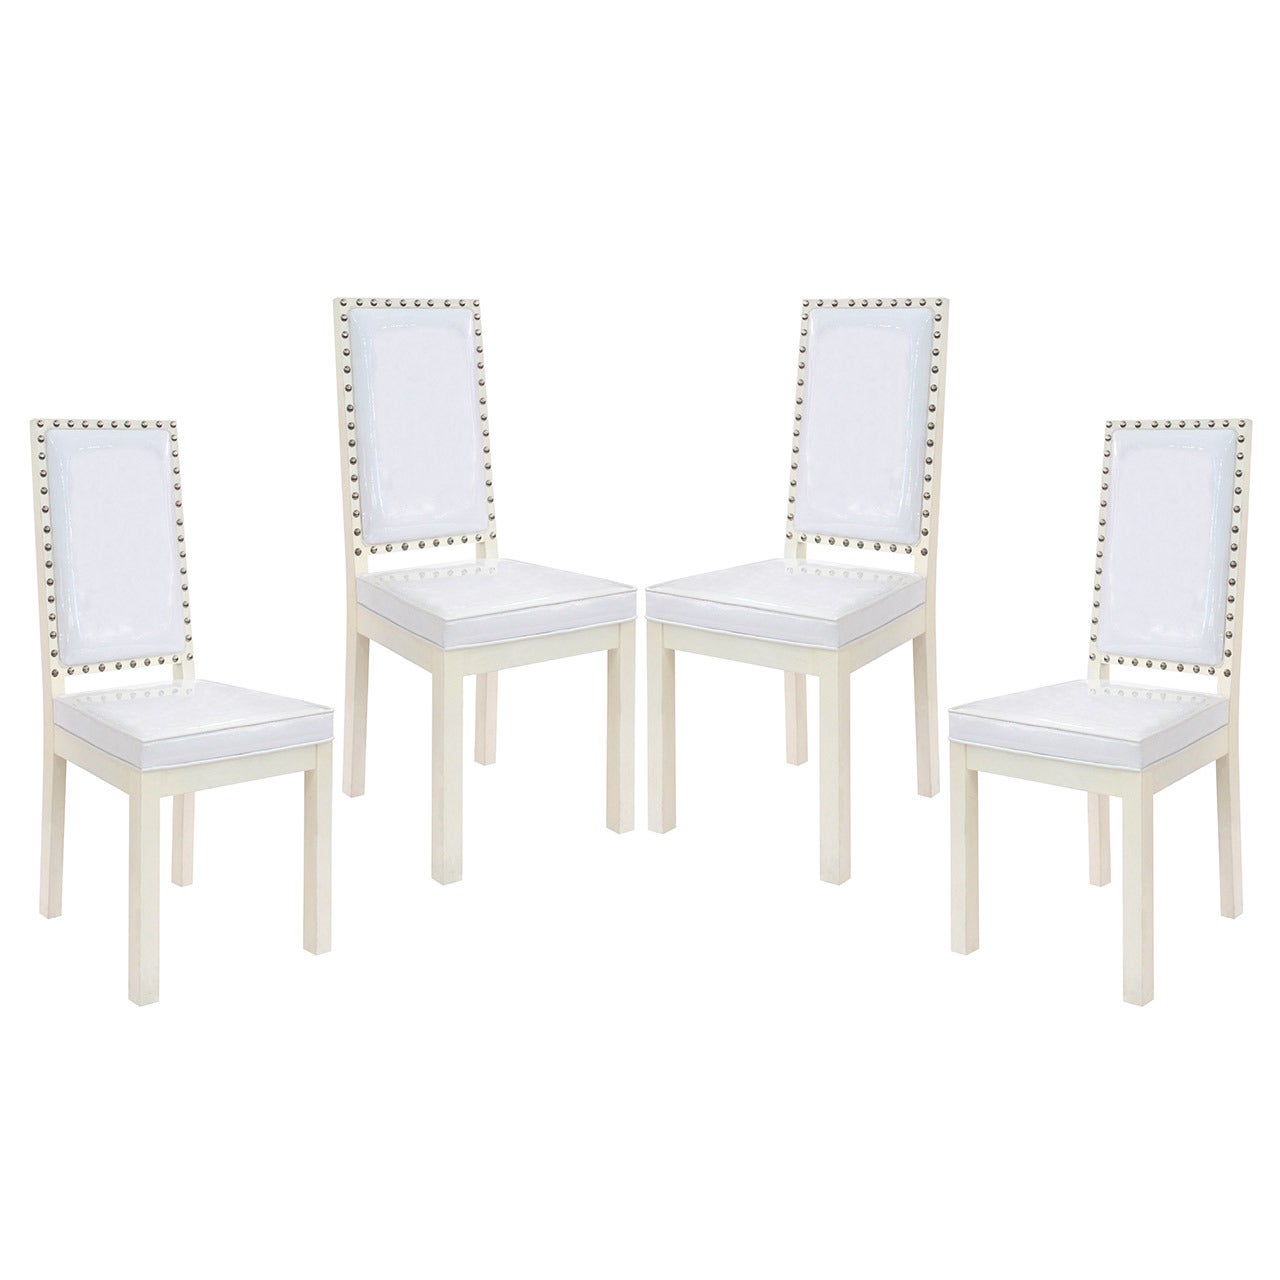 Four Dining or Game Chairs with Studs in the Manner of Tommi Parzinger 1950's For Sale